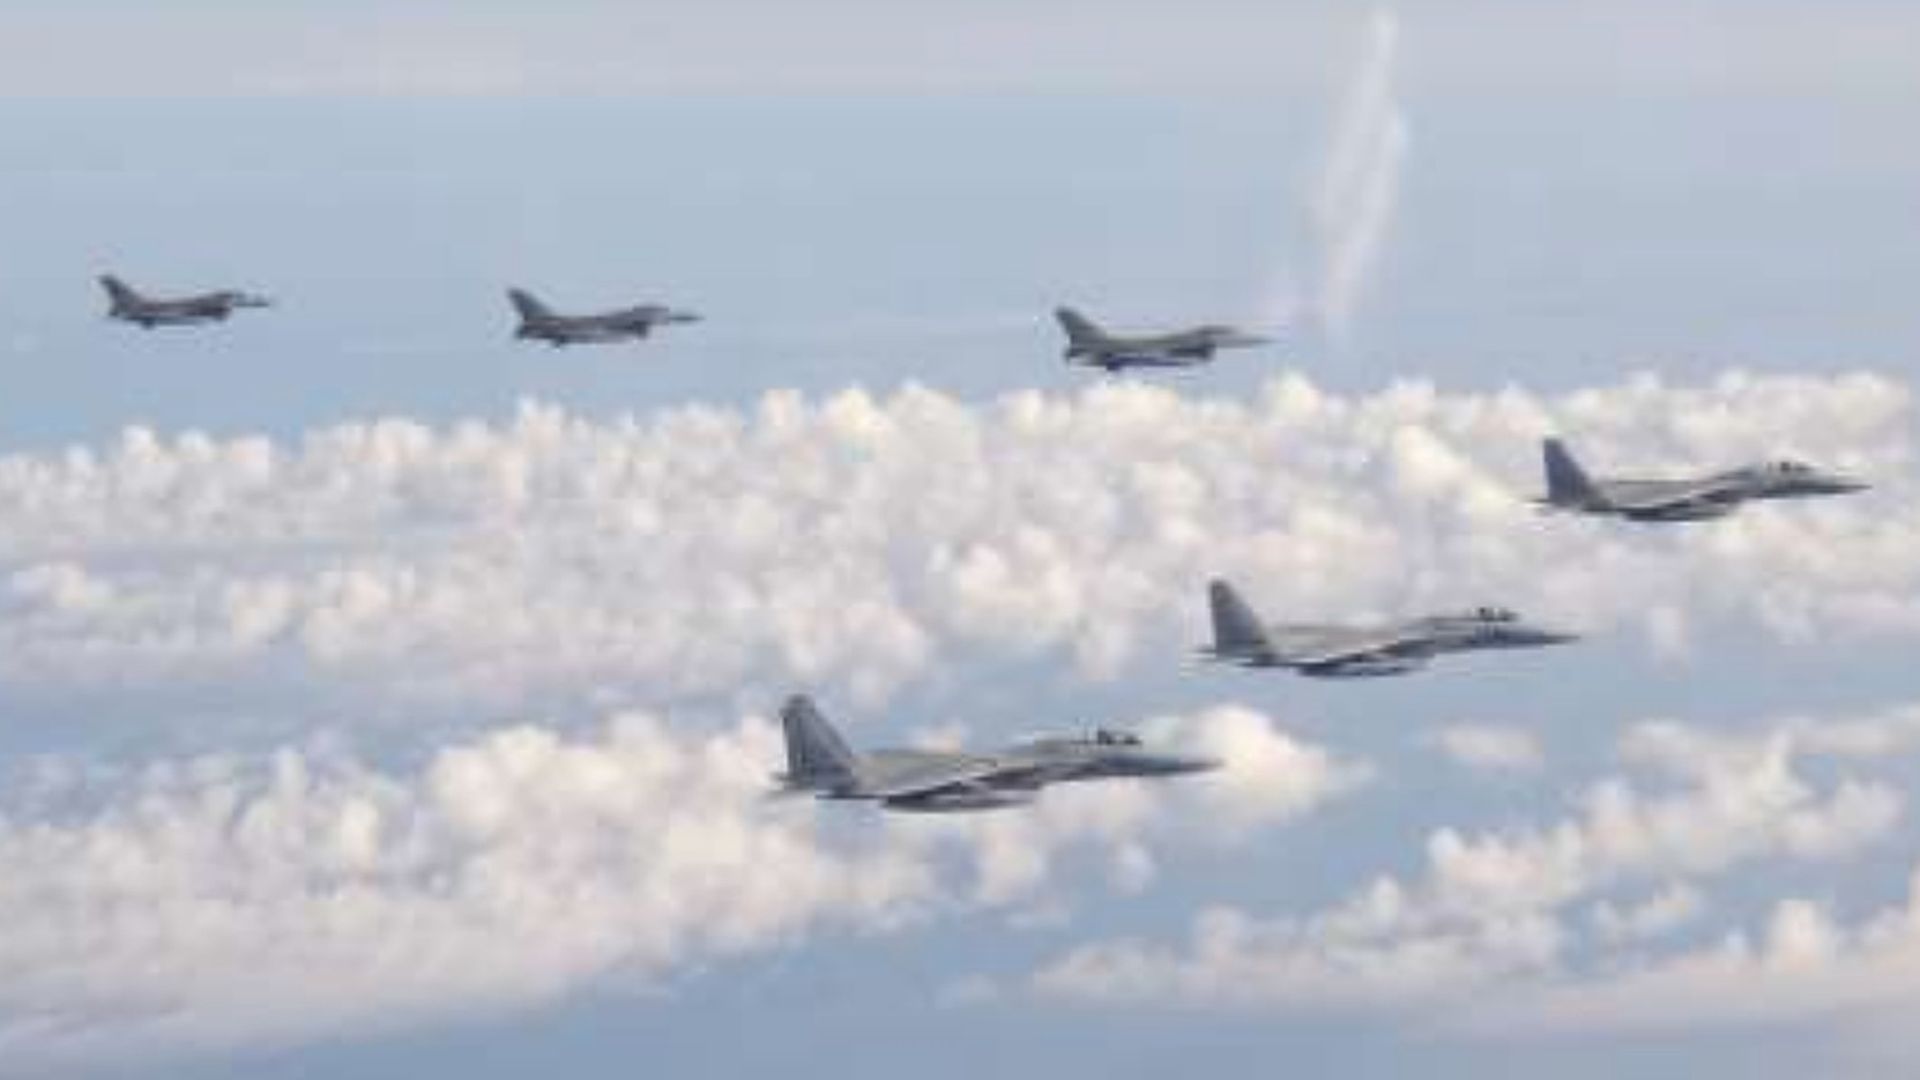 Three F-15 warplanes of the Japanese Self-Defense Force, front, and four F-16 fighters of the U.S. Armed Forces fly over the Sea of Japan on Wednesday, May 25, 2022.